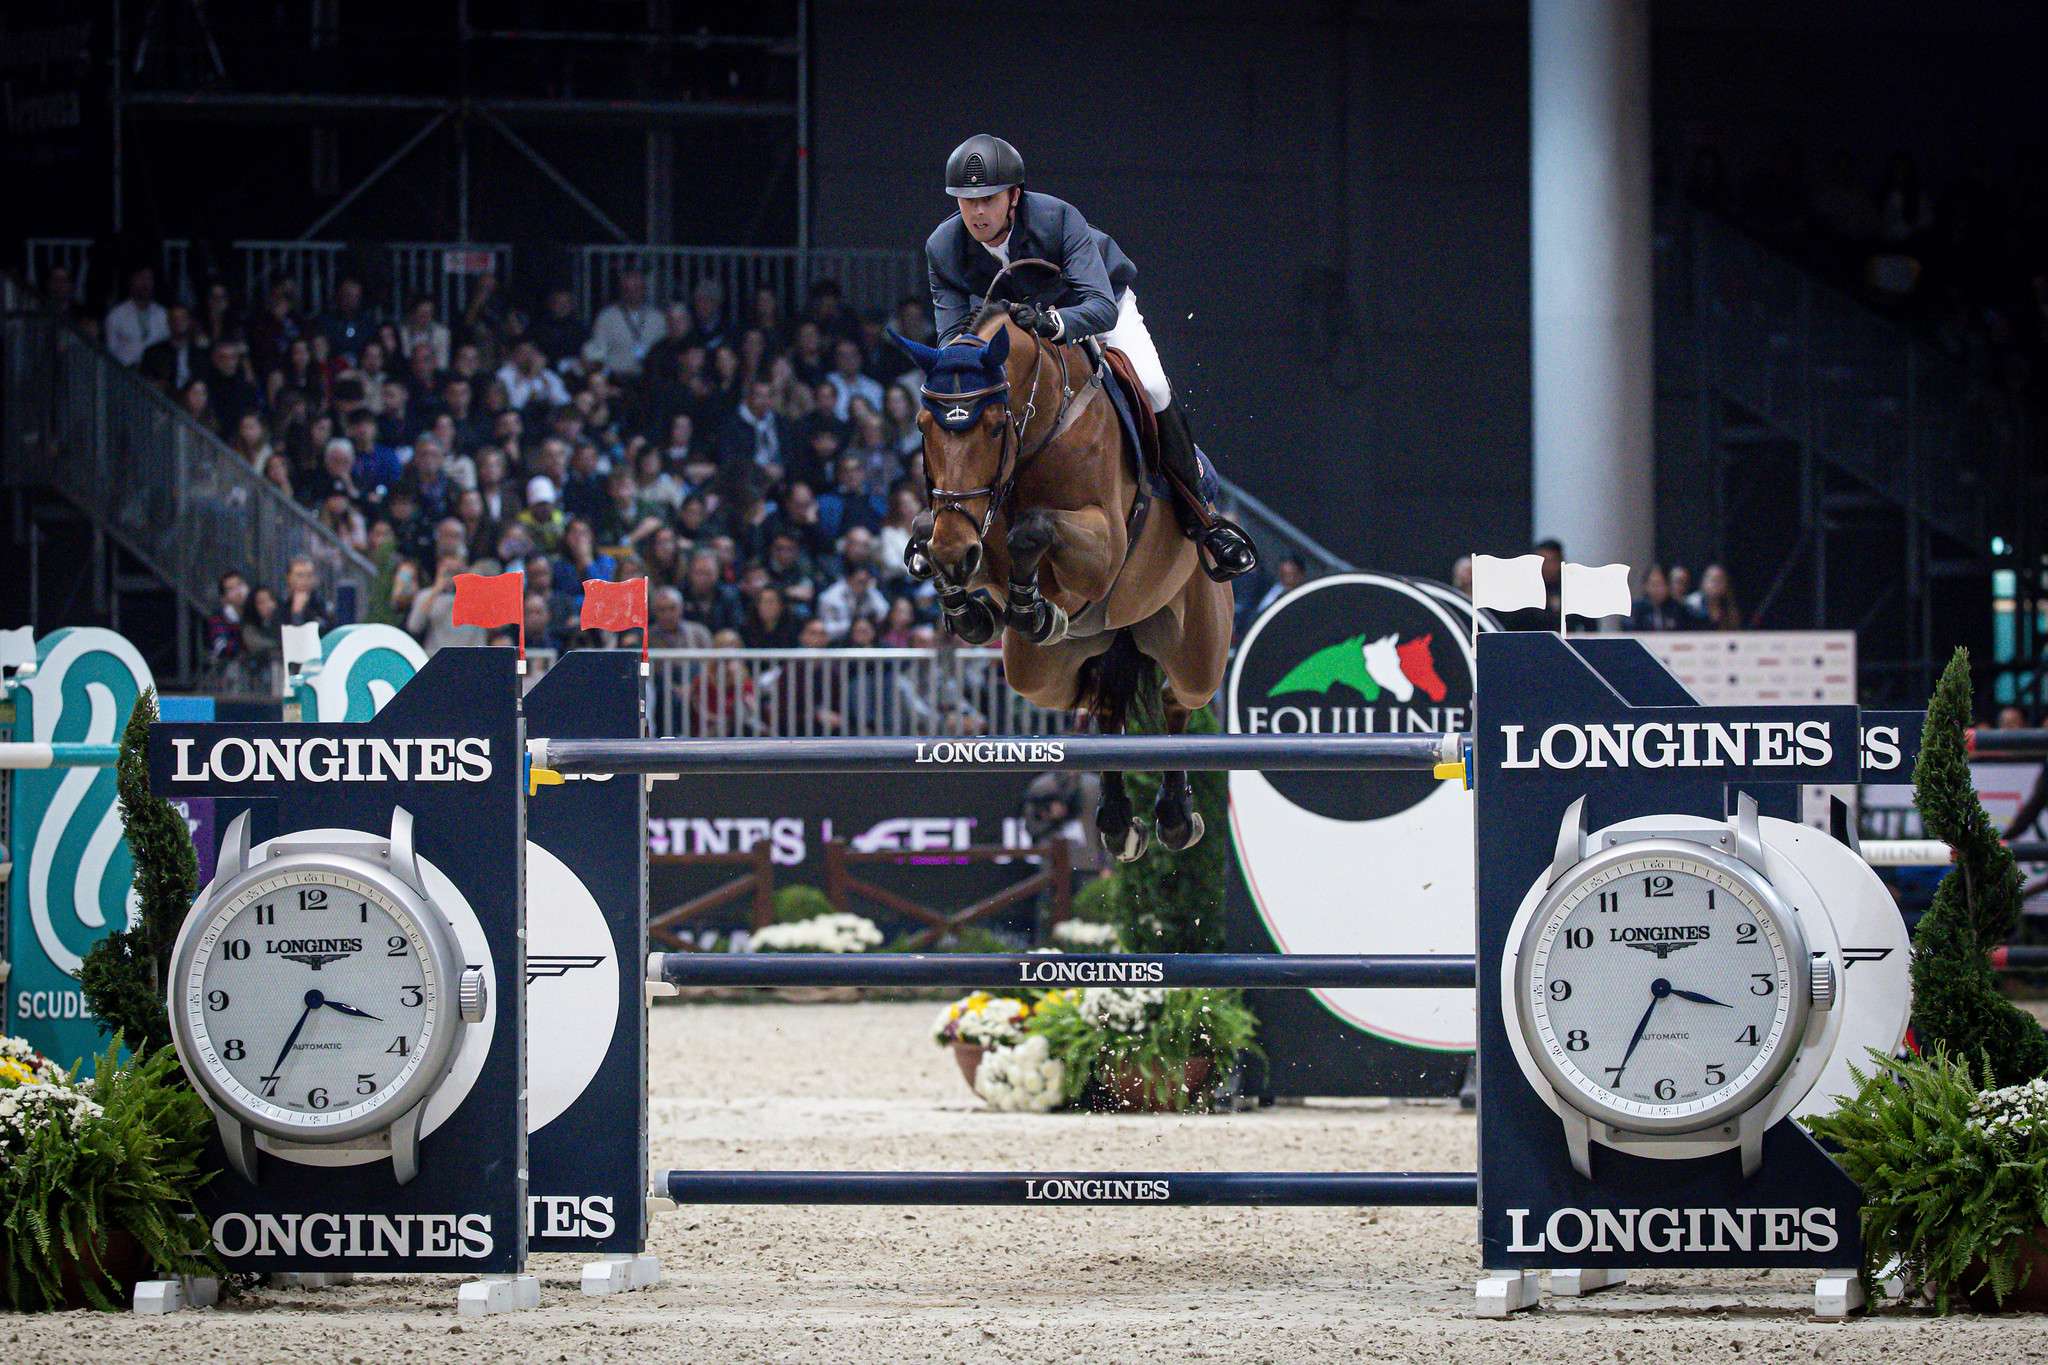 Ben Maher (GBR) and Dallas Vegas Batilly winners of the Longines FEI Jumping World Cup™ 2023/24 - Verona (ITA)
 
Copyright ©FEI/Massimo Argenziano